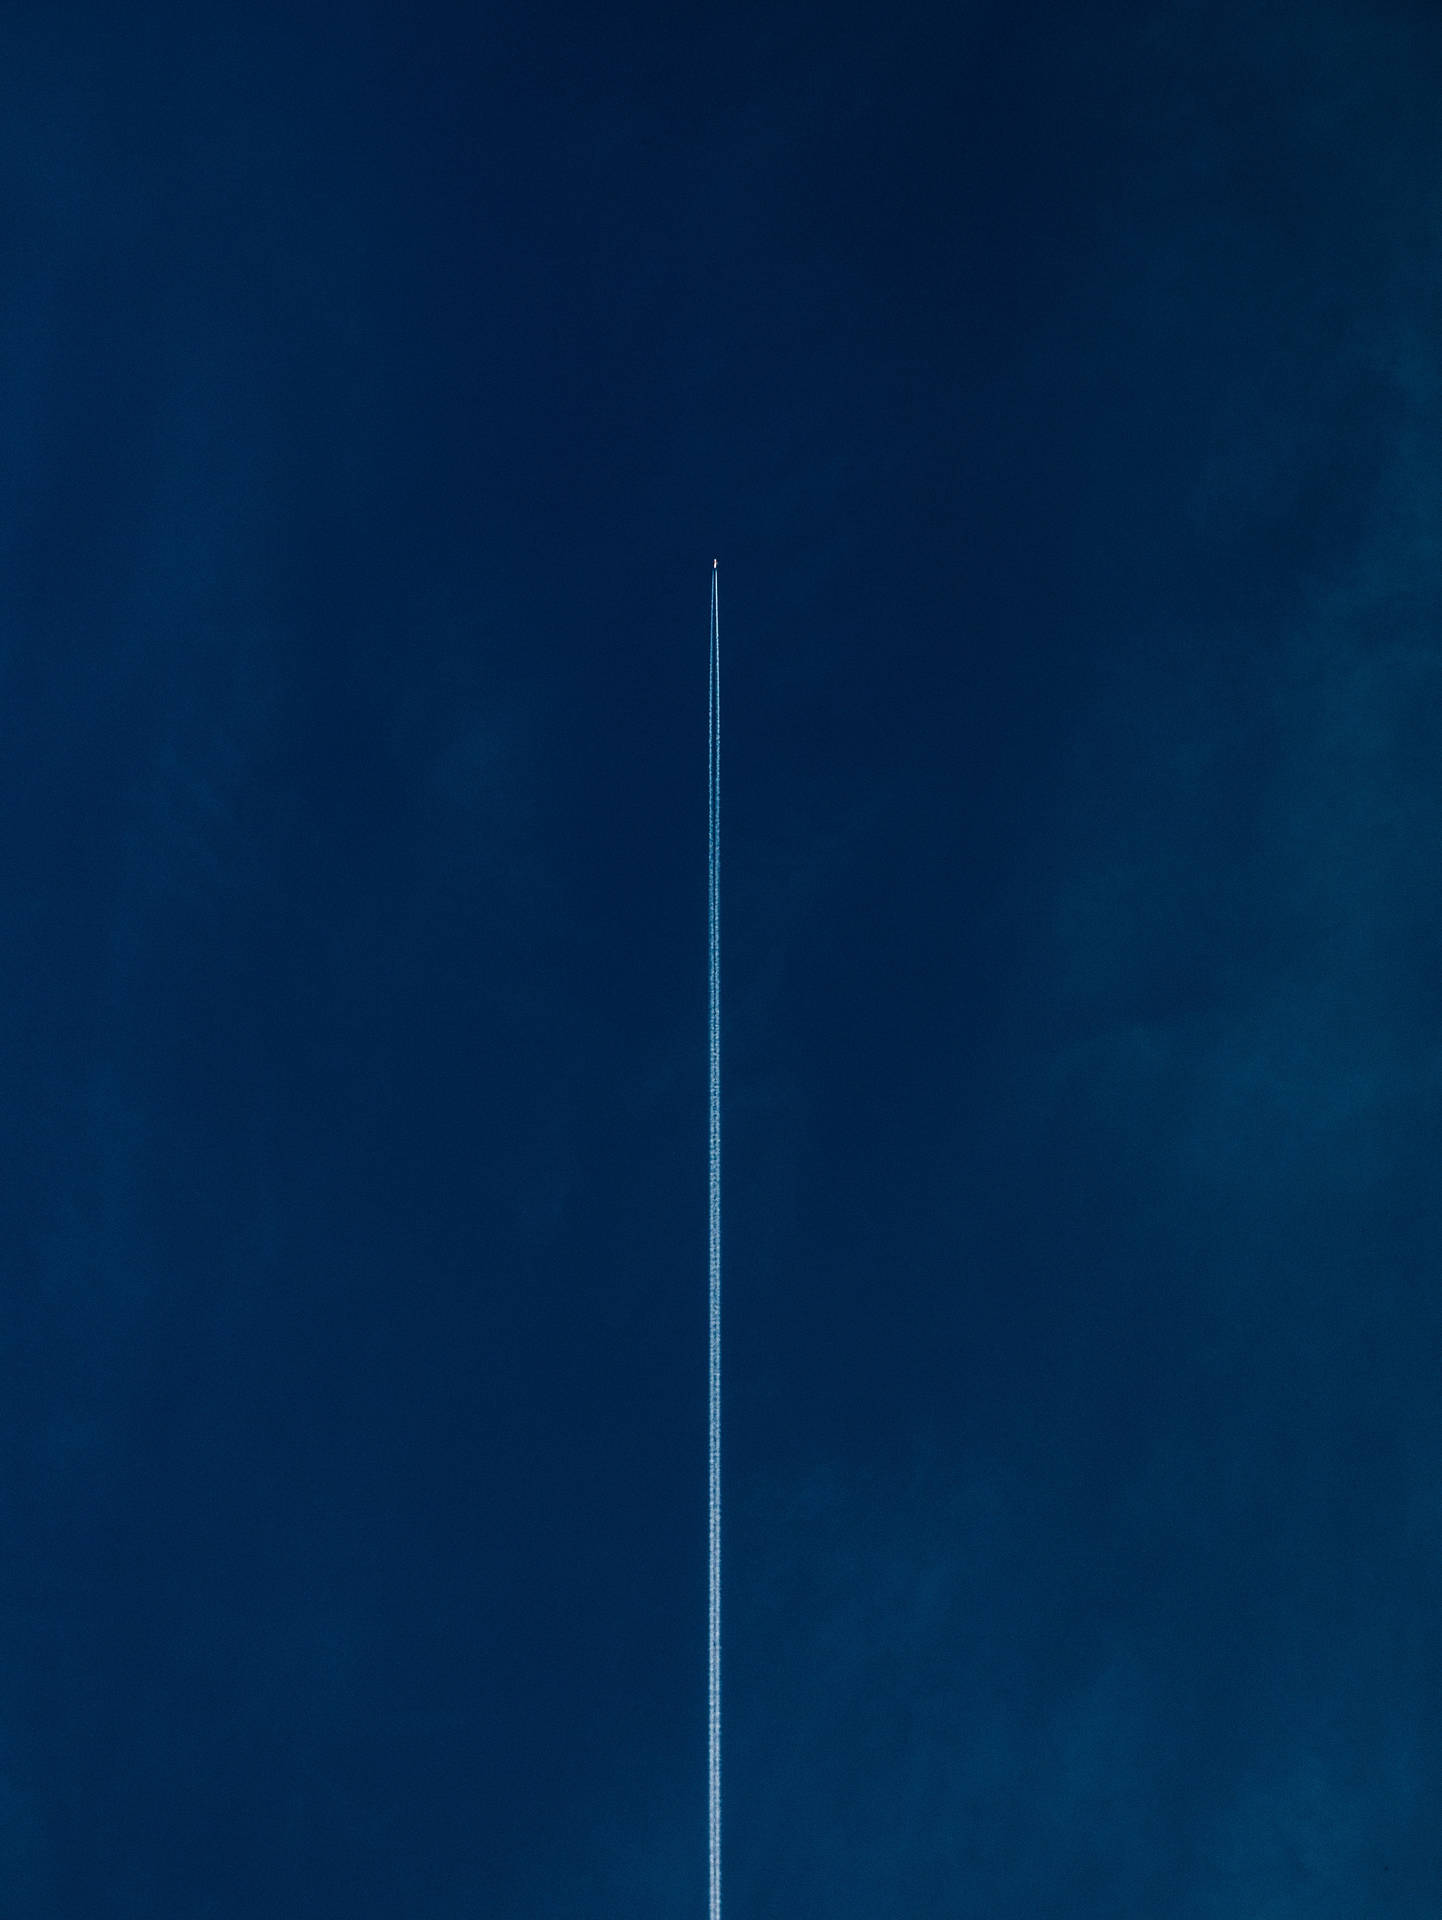 3123X4159 Airplane Wallpaper and Background